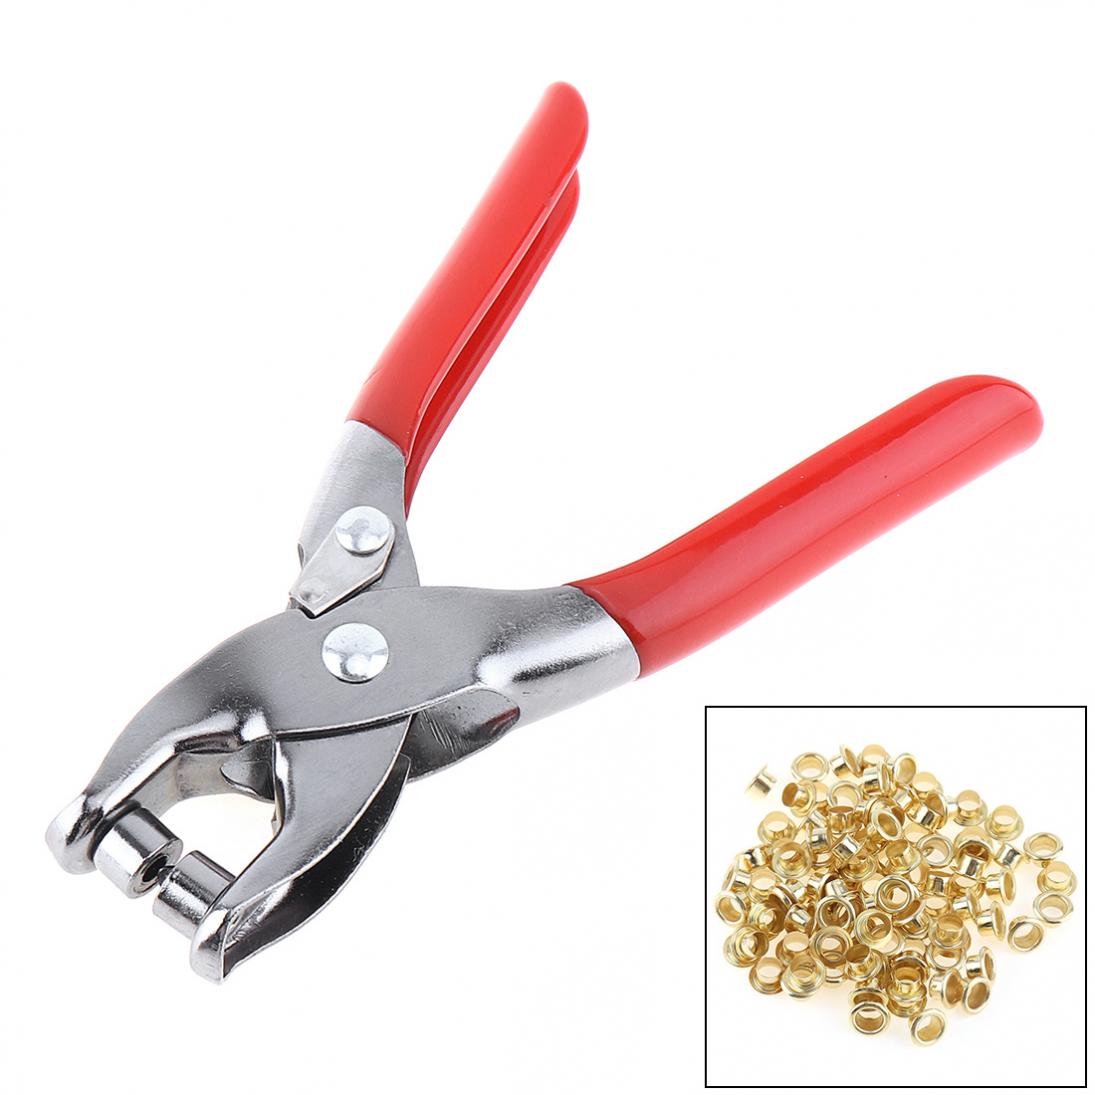 New 6 Inch Rivets pliers Holes Punch Hand Pliers Tool with Lock Catch and 100 Rivet for Punching Leather Belt